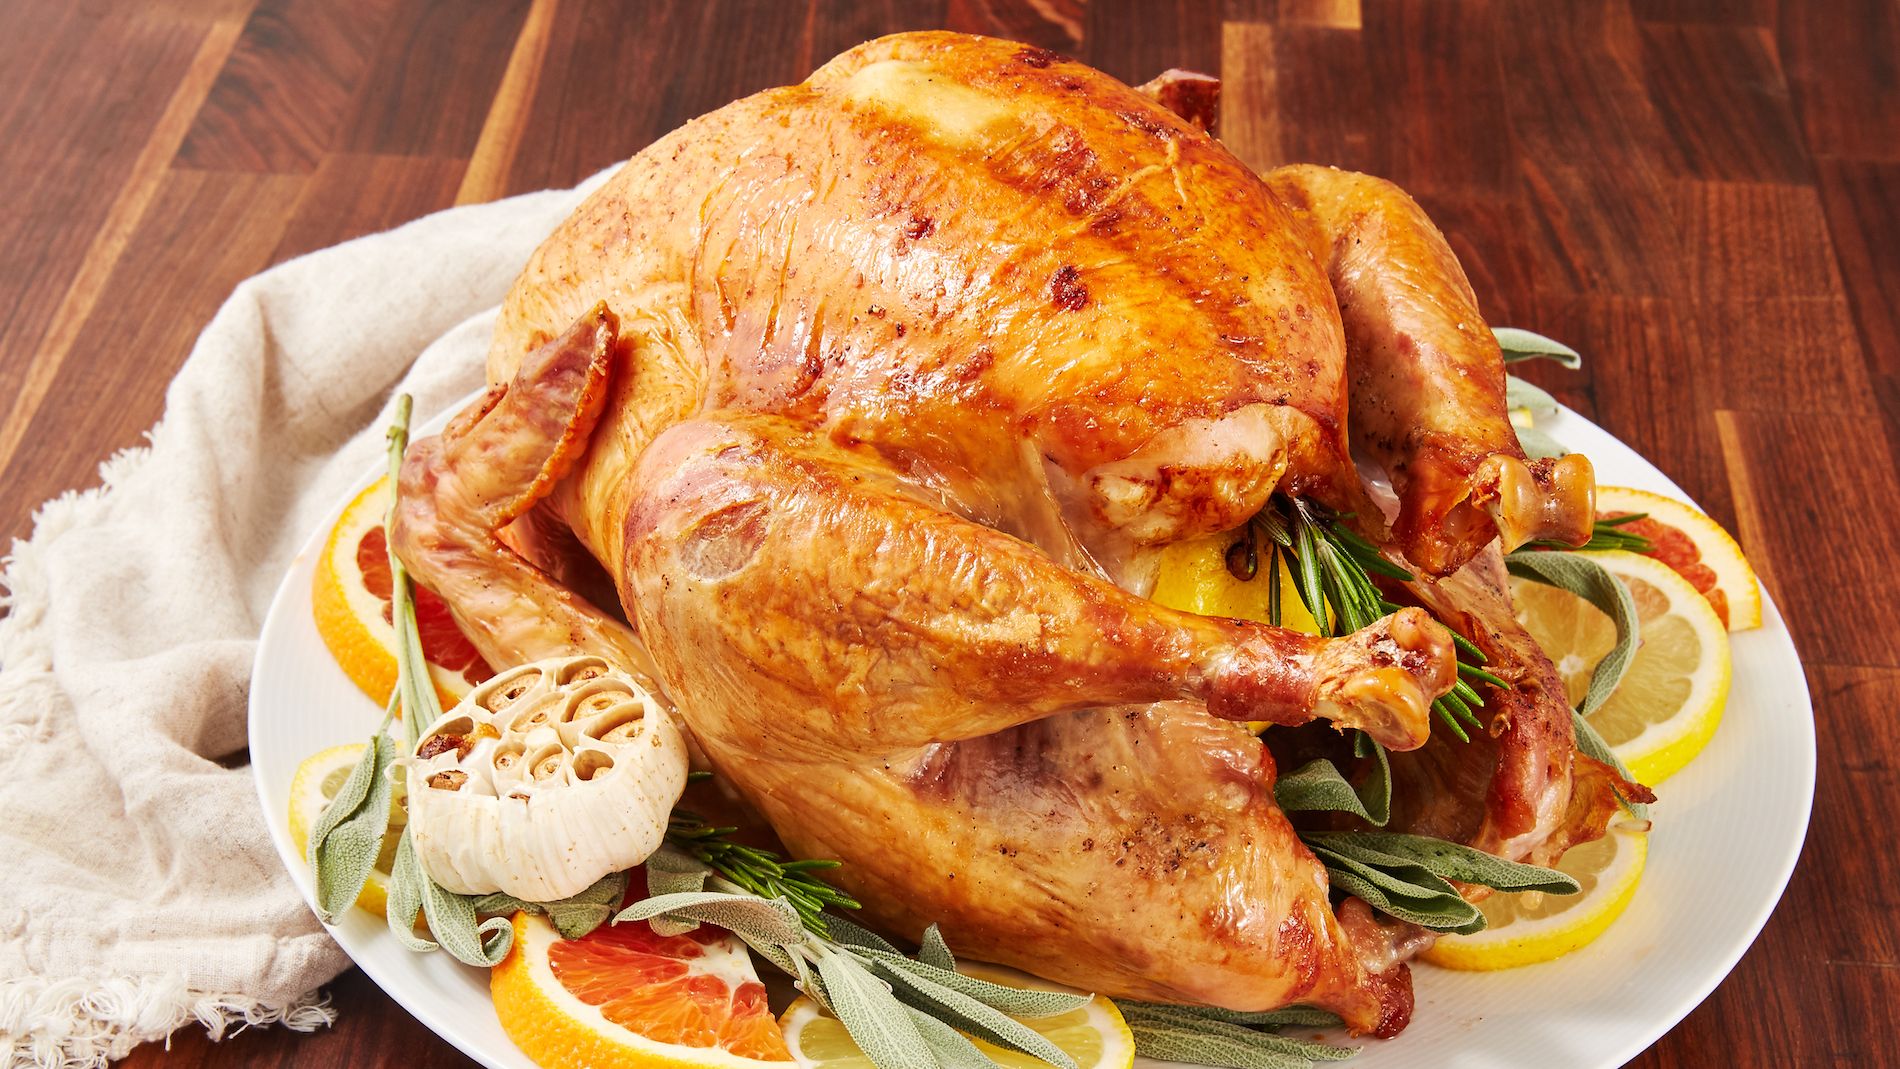 How To Cook a Frozen Turkey for Thanksgiving